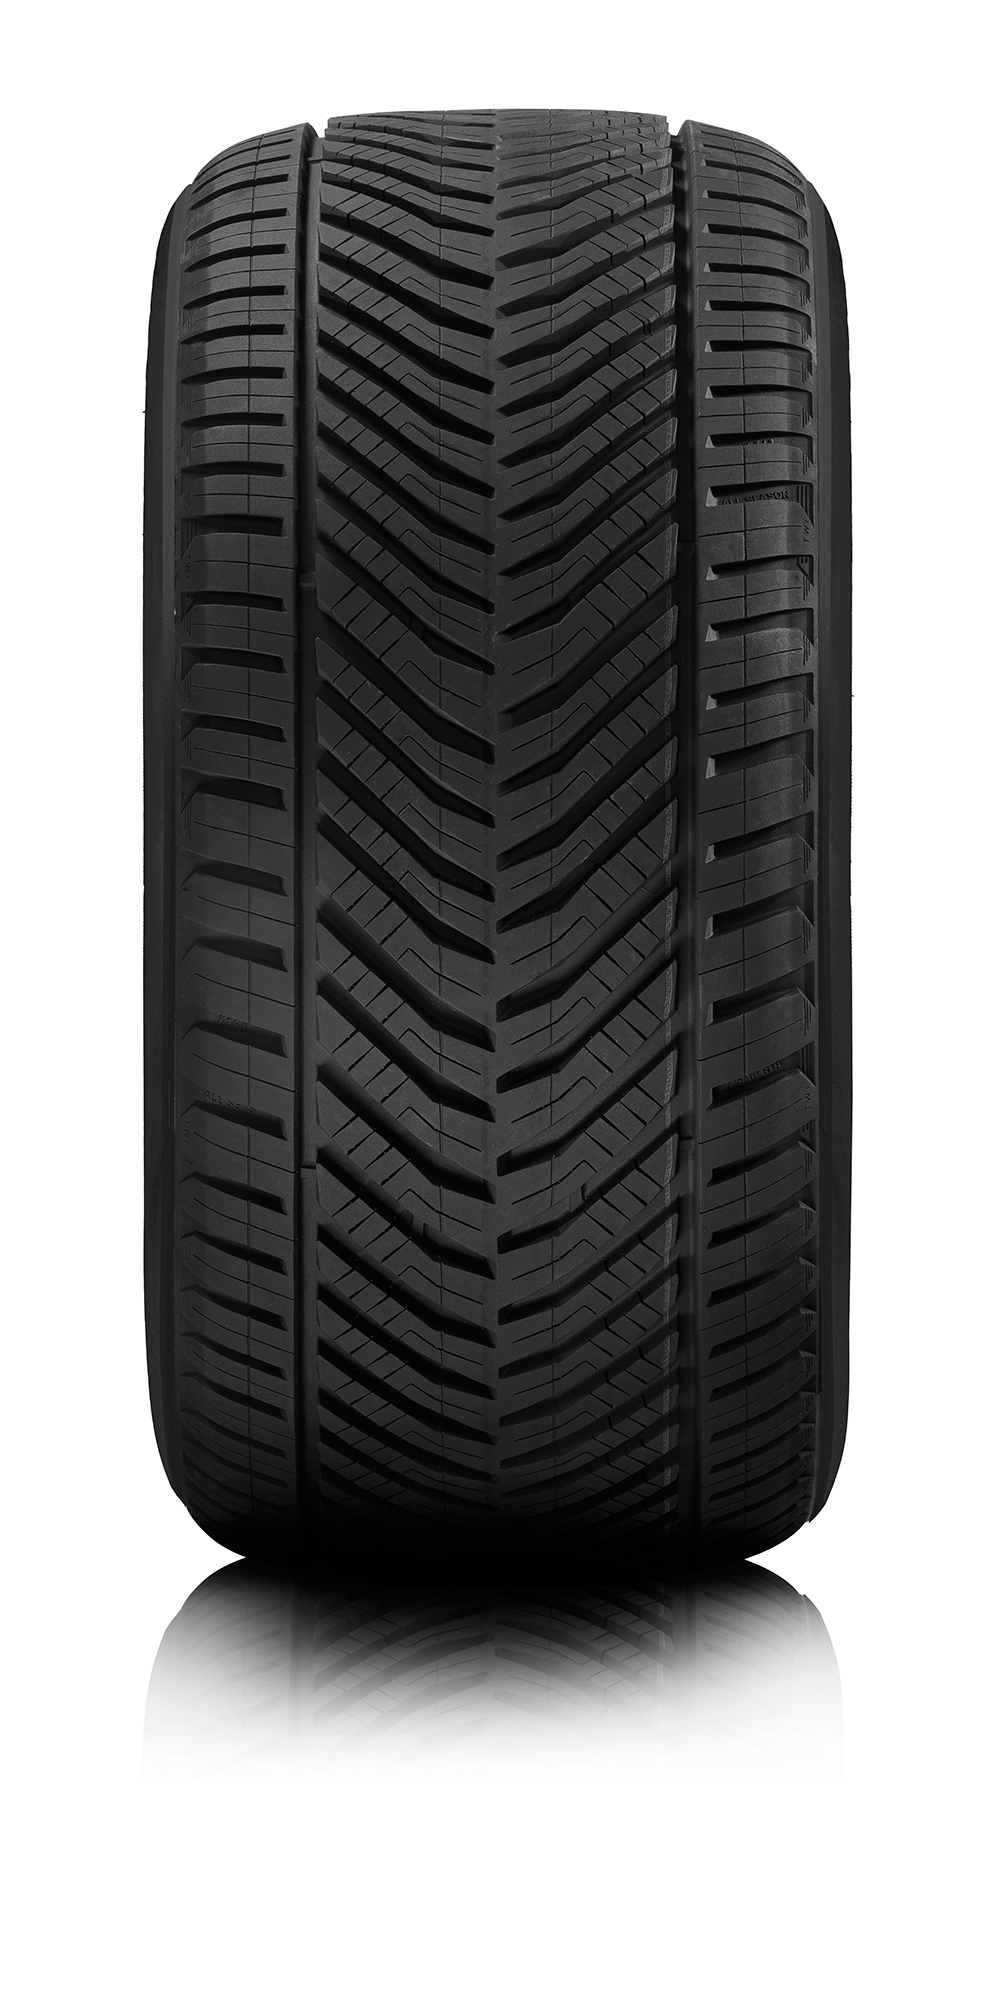 205 55 16  94W XL RIKEN Made by MICHELIN 2 TYRES C C RATING